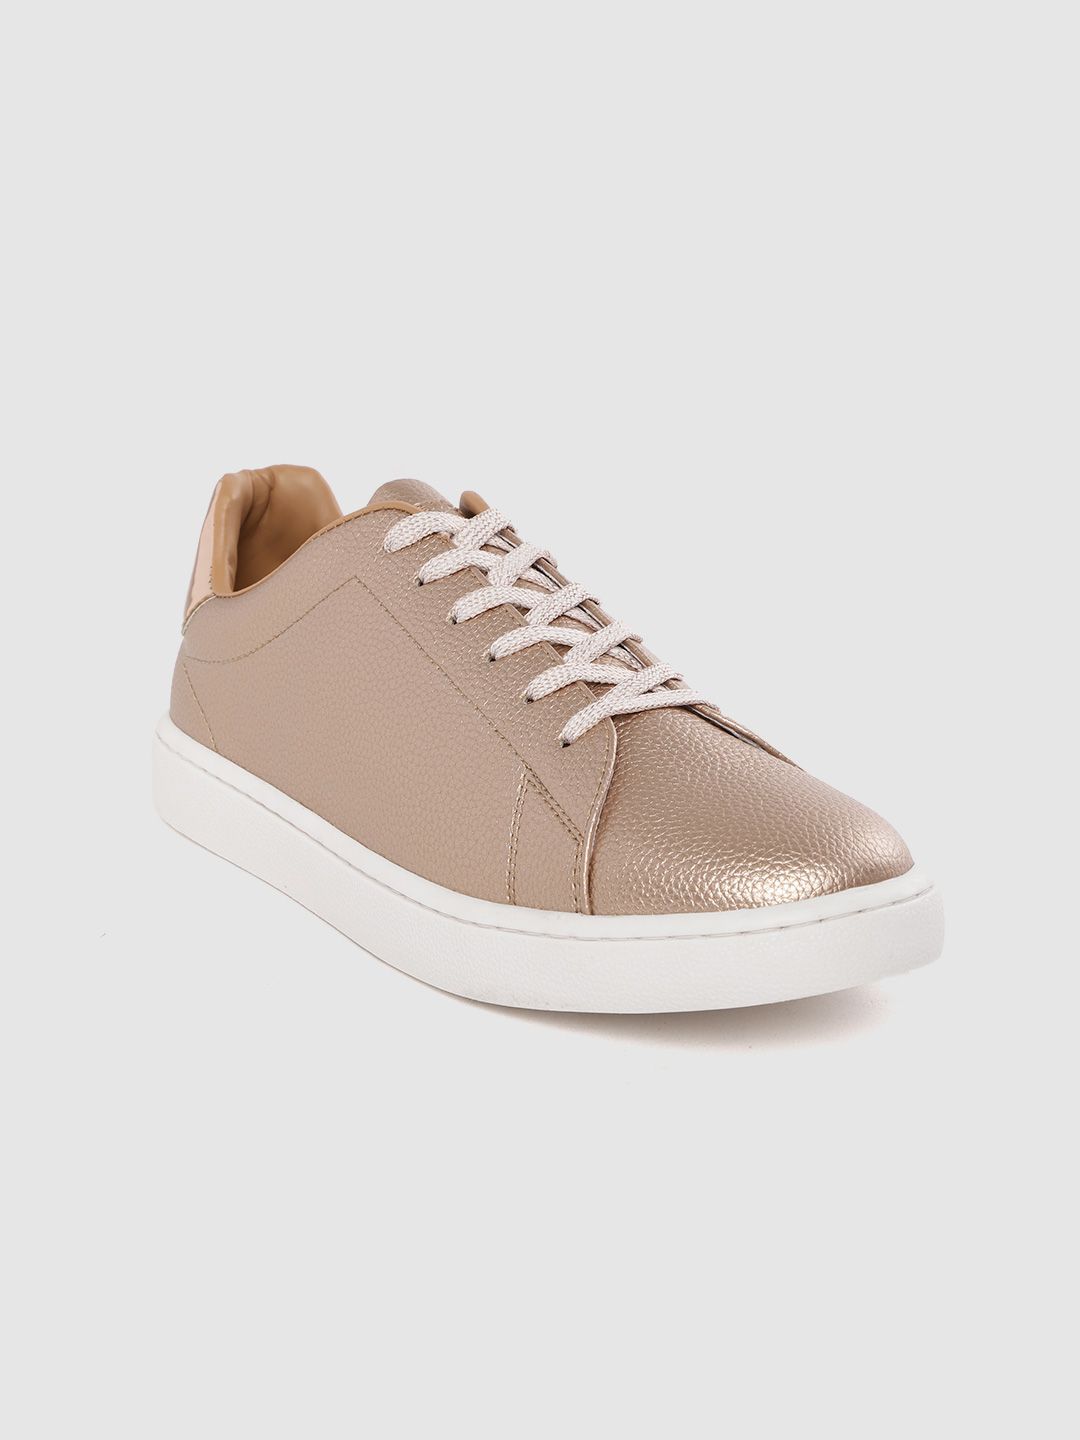 Allen Solly Women Rose Gold-Toned Solid Sneakers Price in India